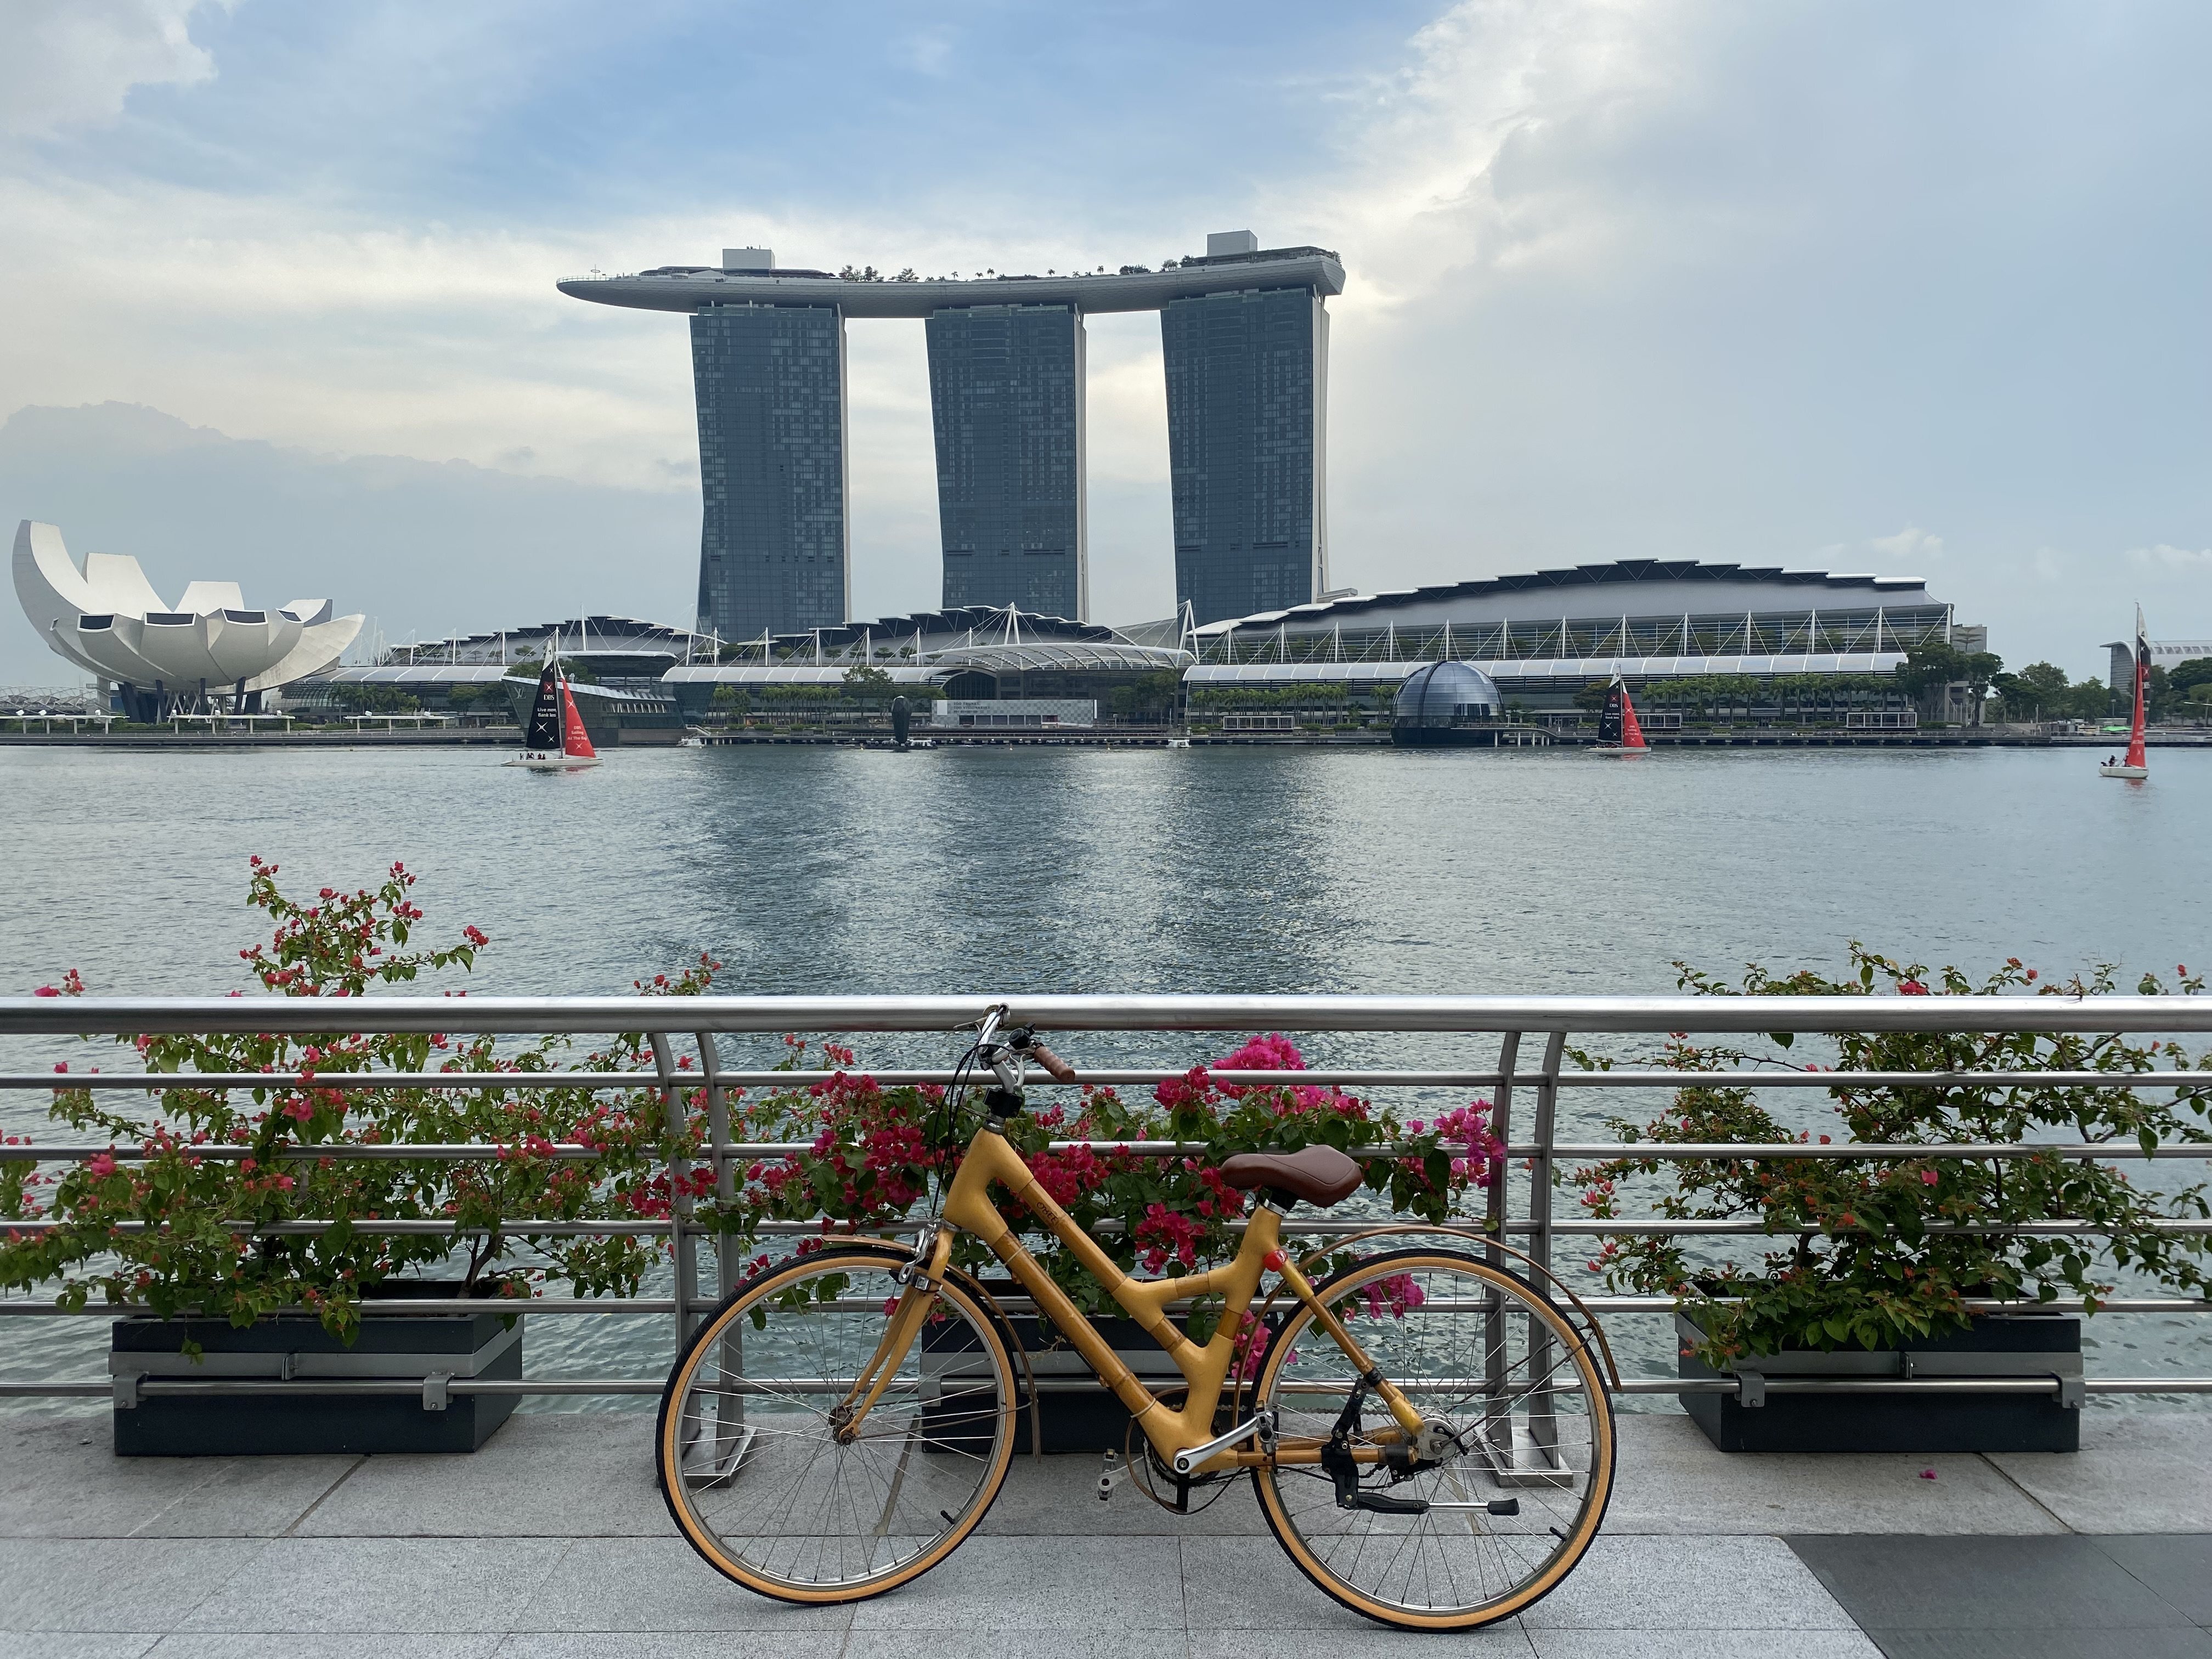 A 500km network of new and improved cycle paths makes it an attractive pursuit for visitors and residents alike, who can take in views like this one of Marina Bay. Photo: Tamara Hinson